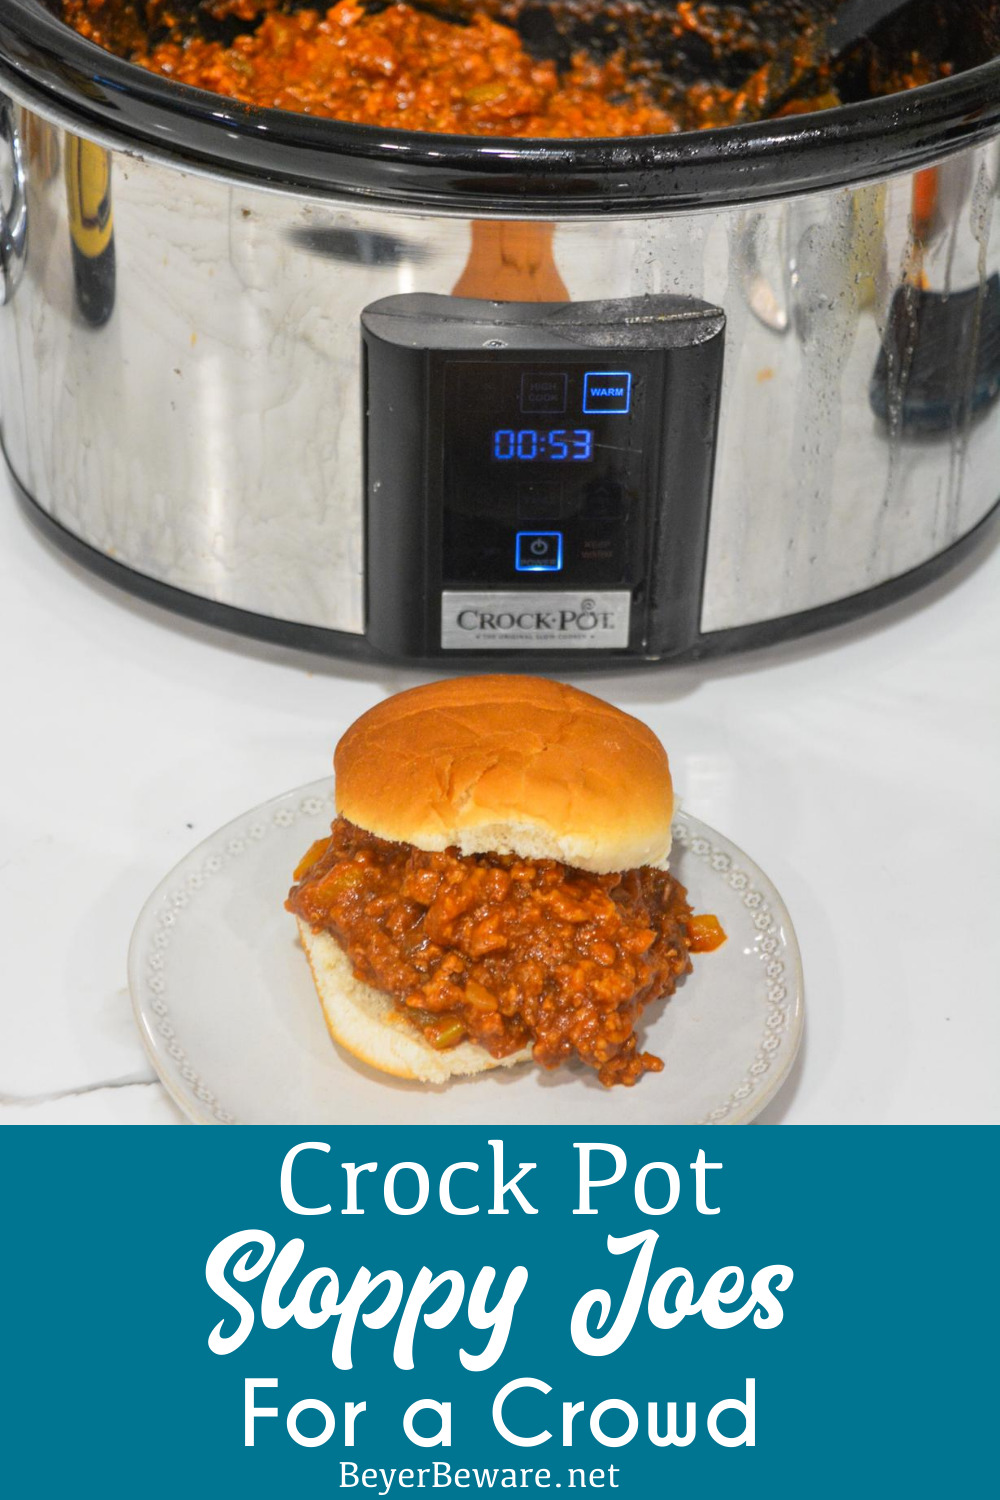 Crock pot sloppy joes for a crowd is a large batch of sloppy joes recipe when you are looking for a recipe to feed a bunch of hungry people.